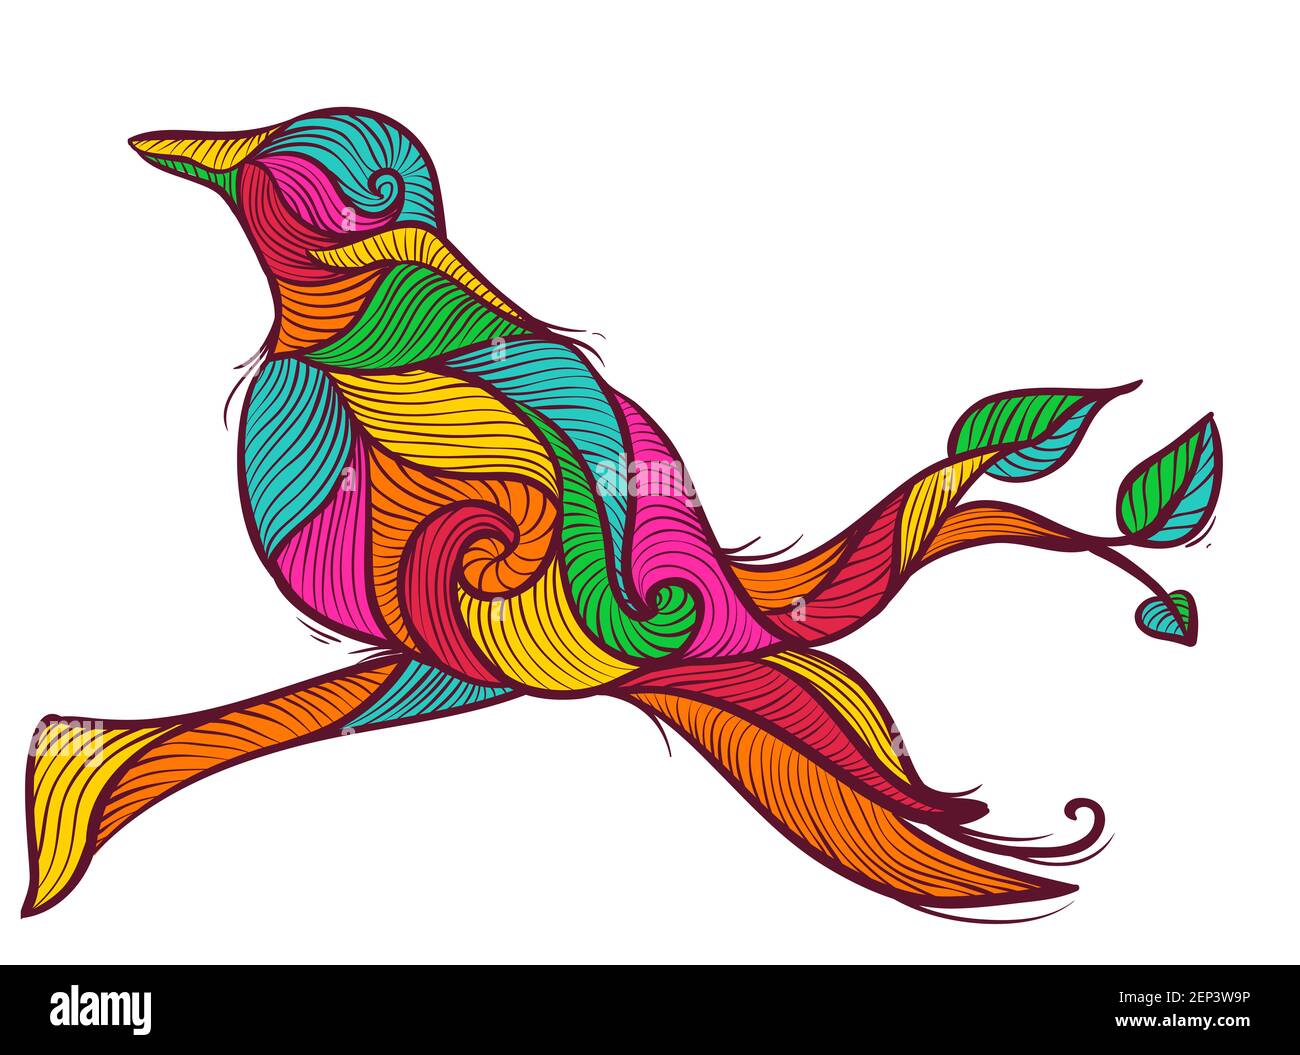 Colorful Line Art Illustration of a Bird on Branch Stock Photo